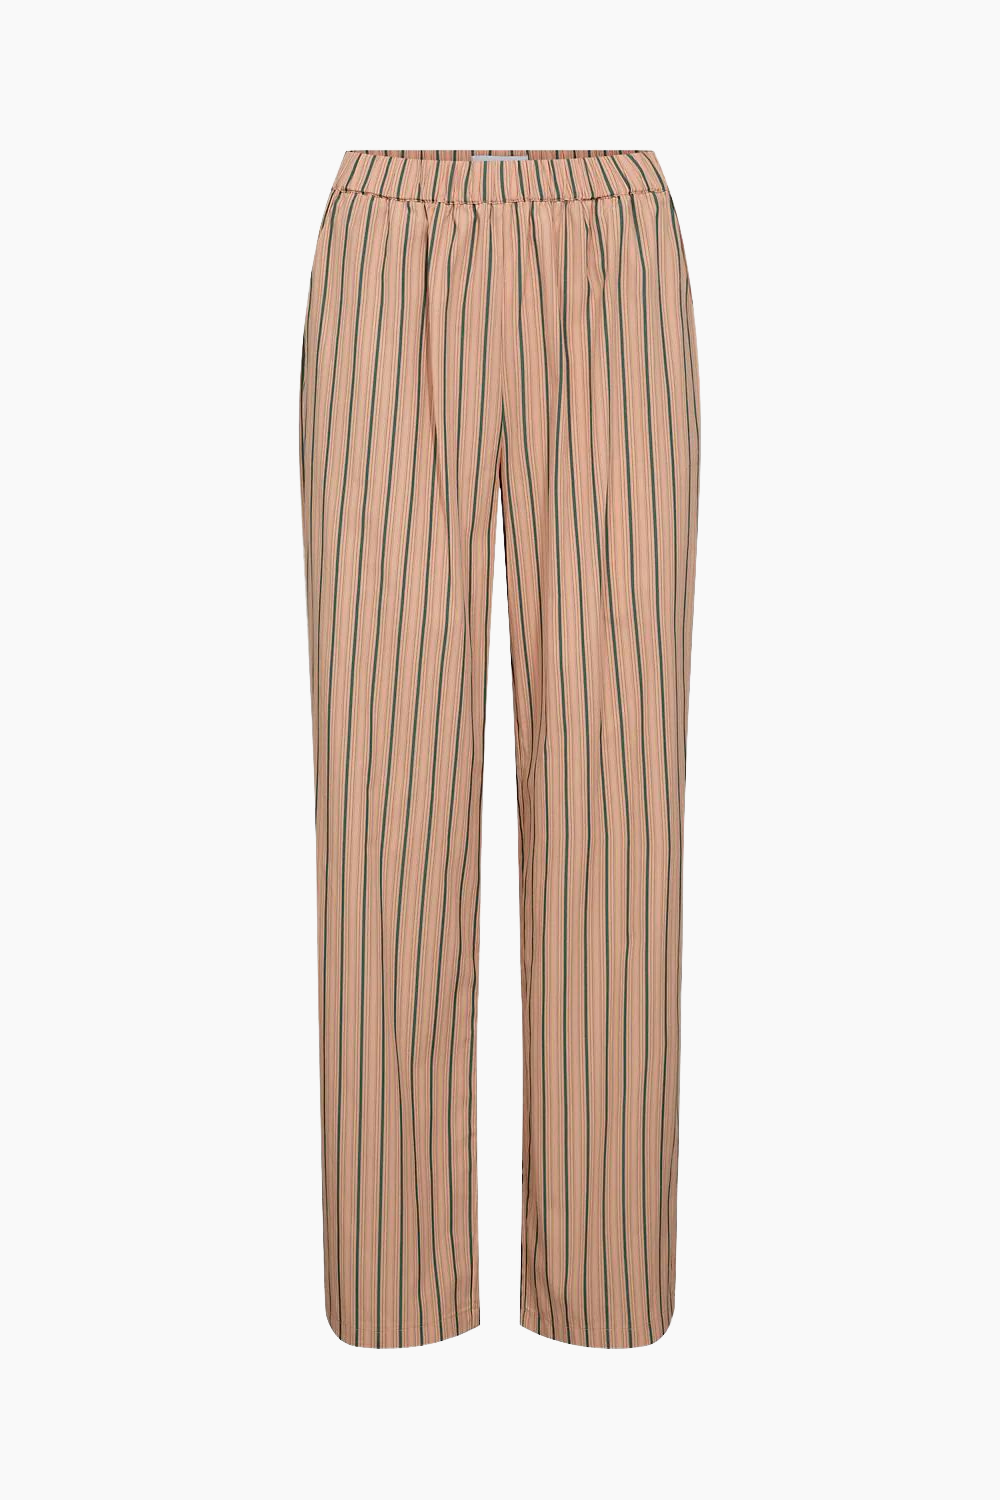 Evis Casual Pants - Bleached Apricot - Moves